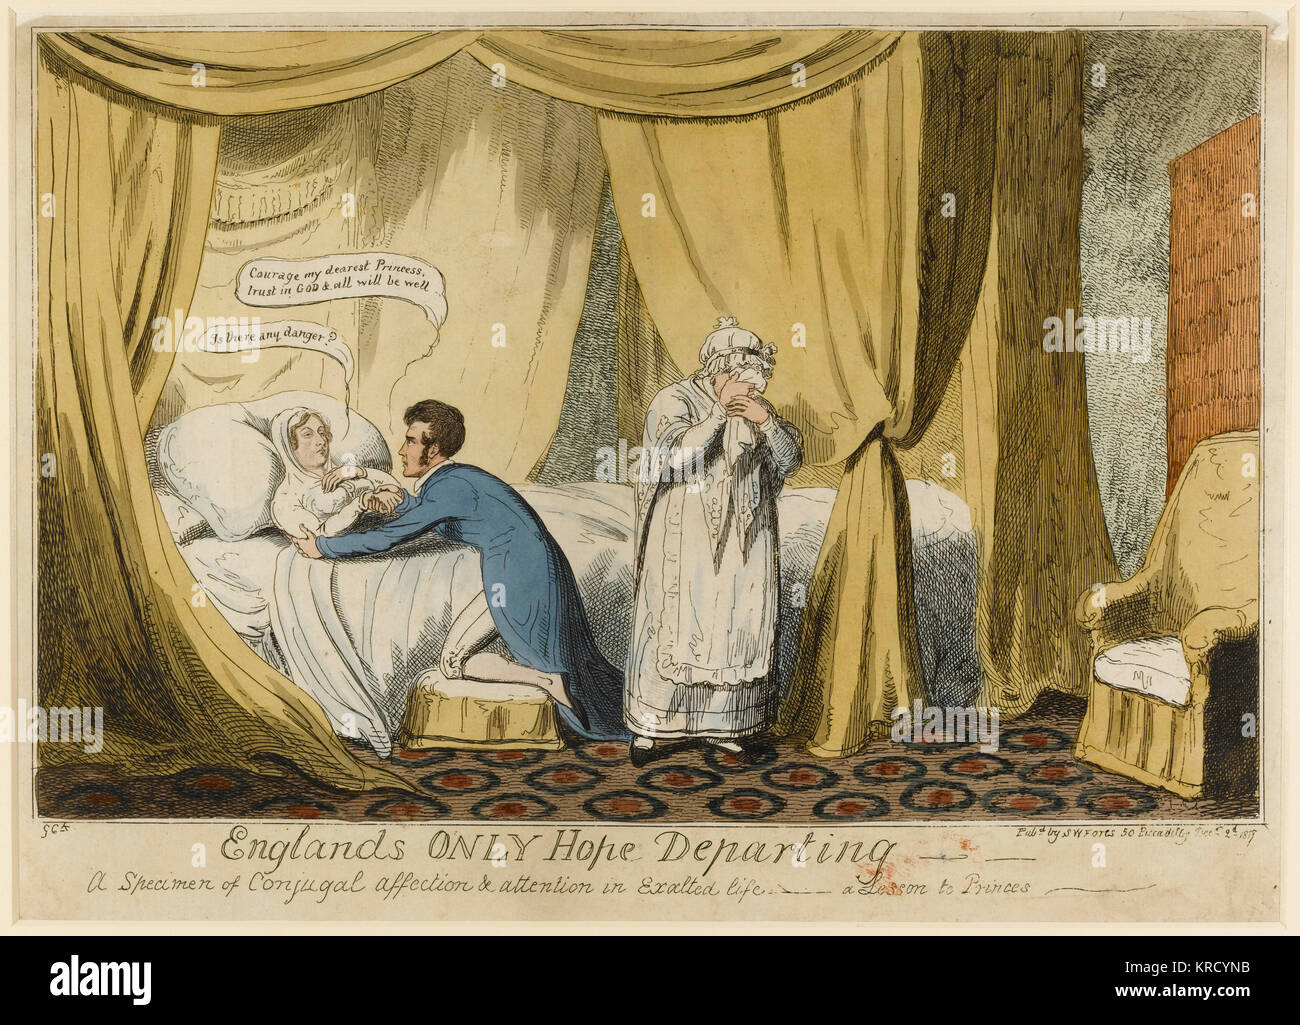 Cartoon, England's only Hope Departing.  A tragic deathbed scene. Princess Charlotte Augusta of Wales, daughter of the Prince Regent, died after the birth of a stillborn child on 6 November 1817, causing national grief. Had she survived she, and not Princess Victoria, would have succeeded King William IV to the throne.      Date: 1817 Stock Photo